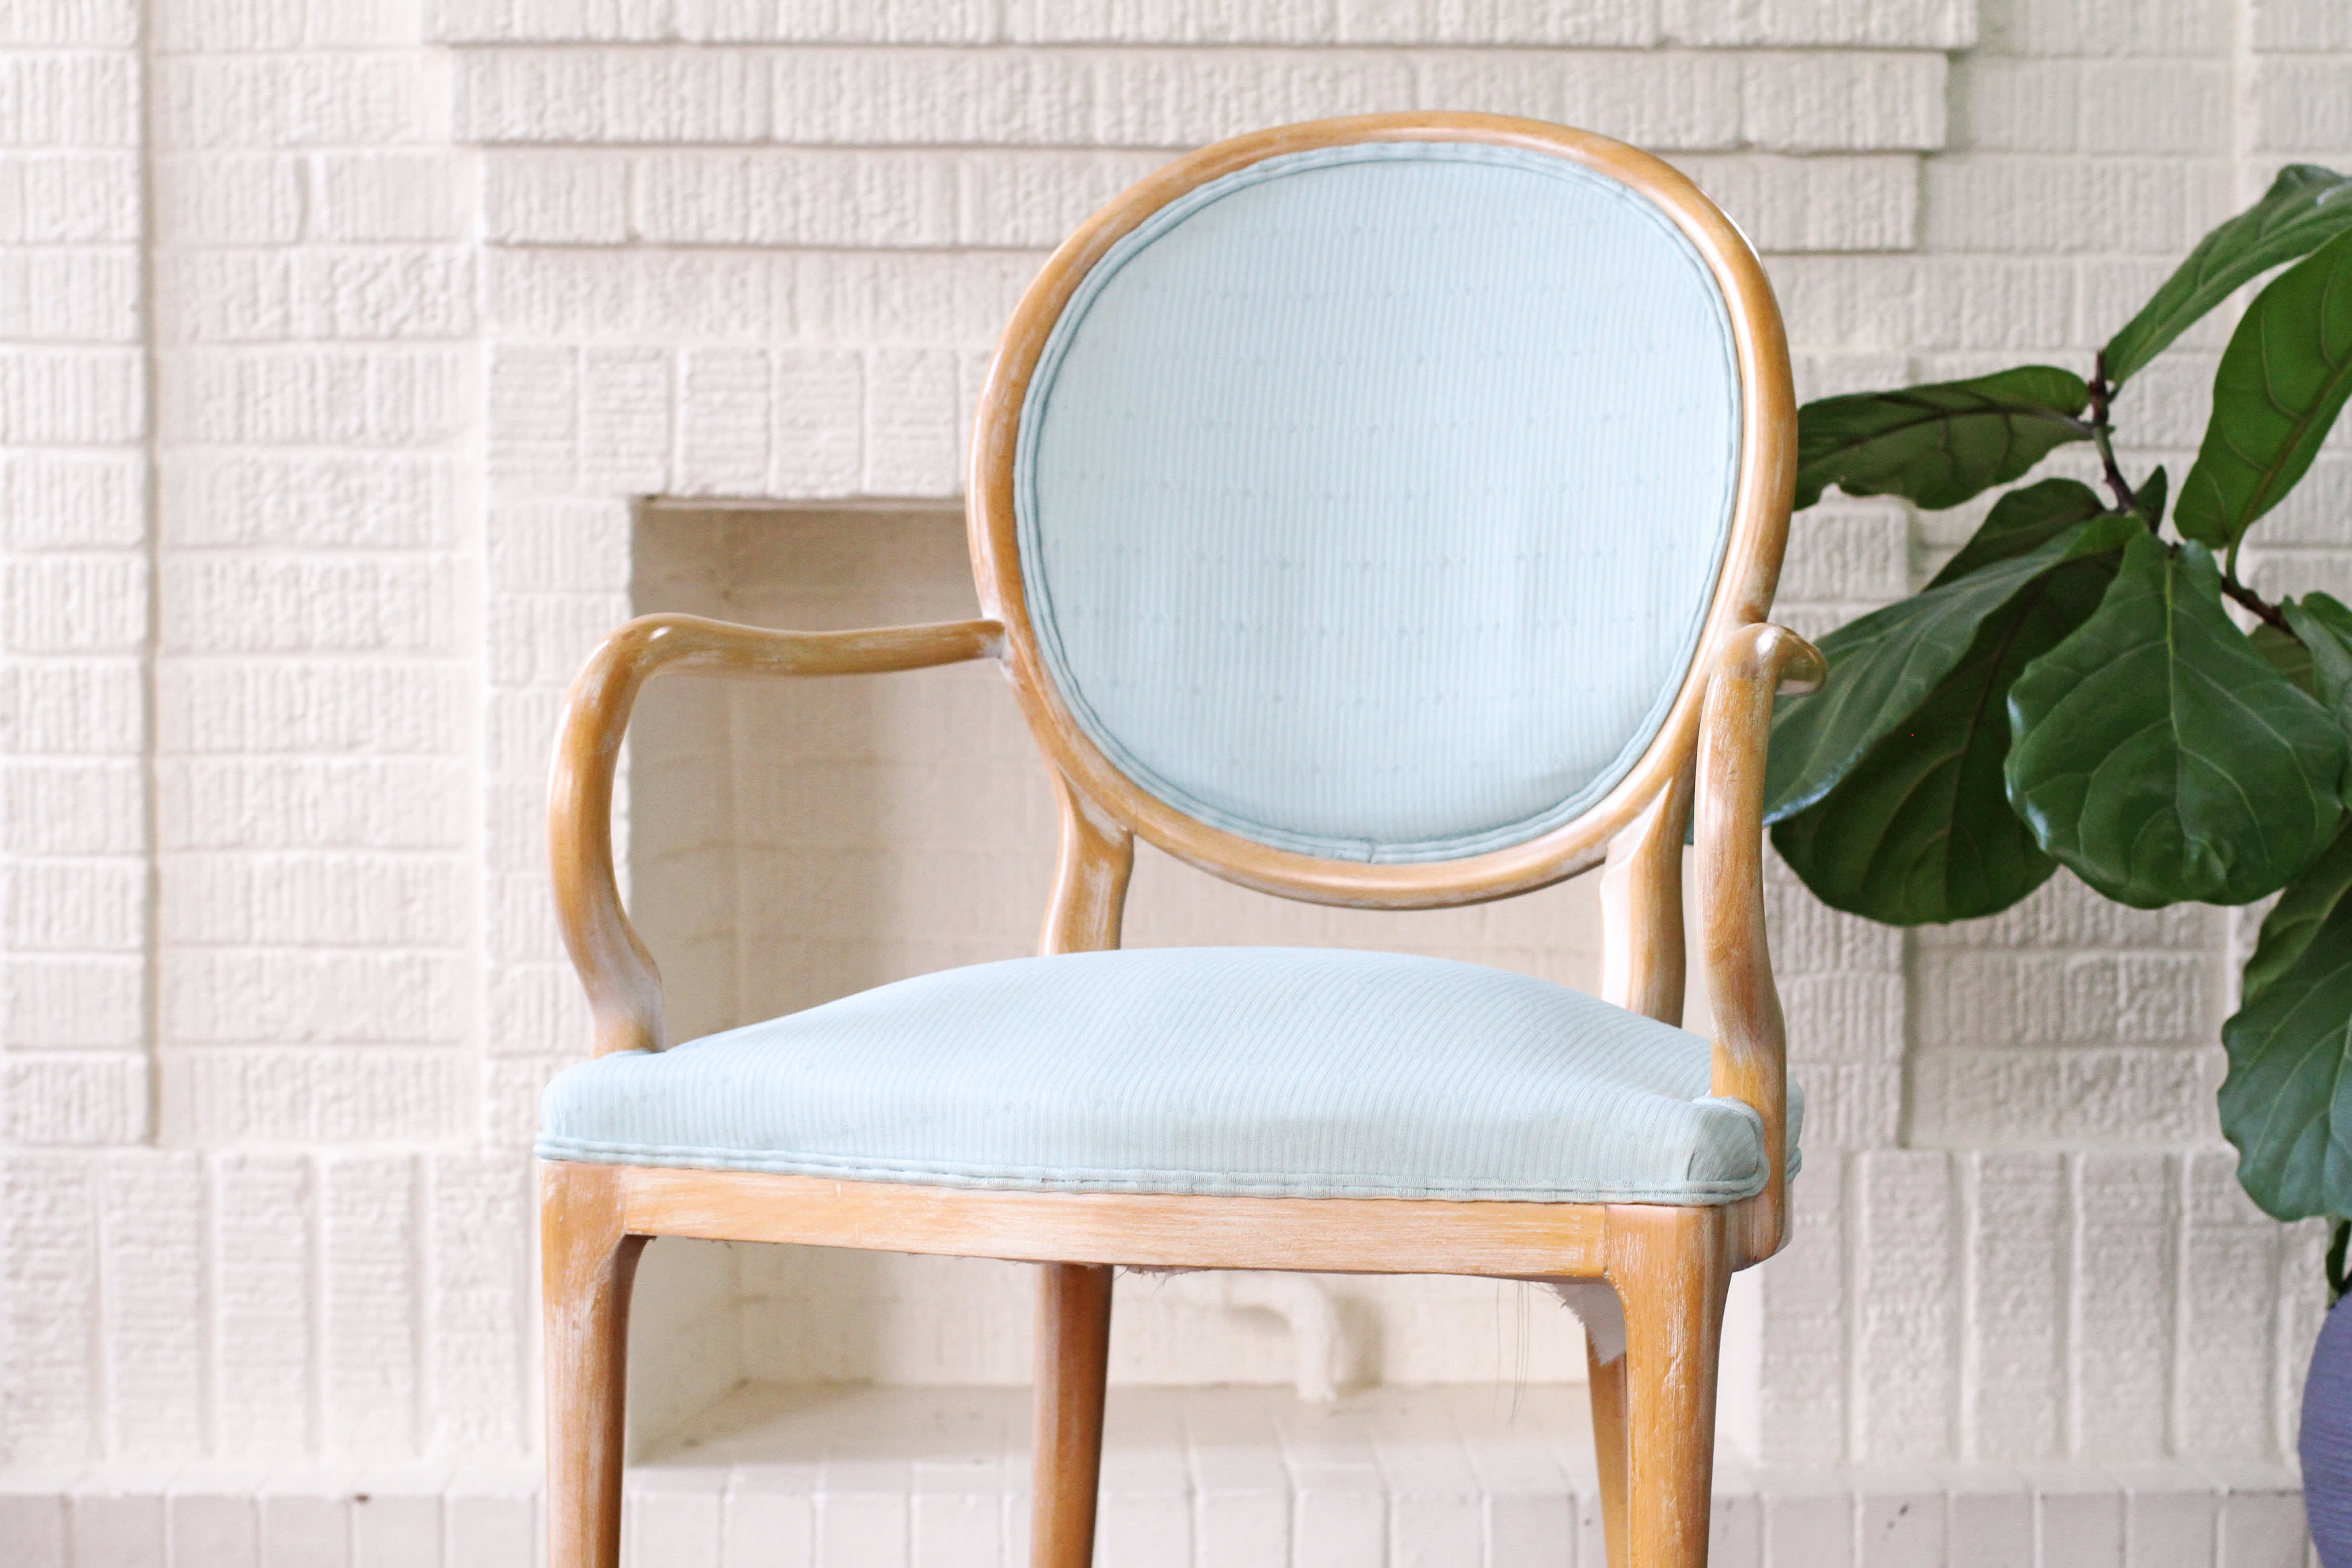 How-to-Paint-Upholstery-using-chalk-paint.-See-how-I-painted-this